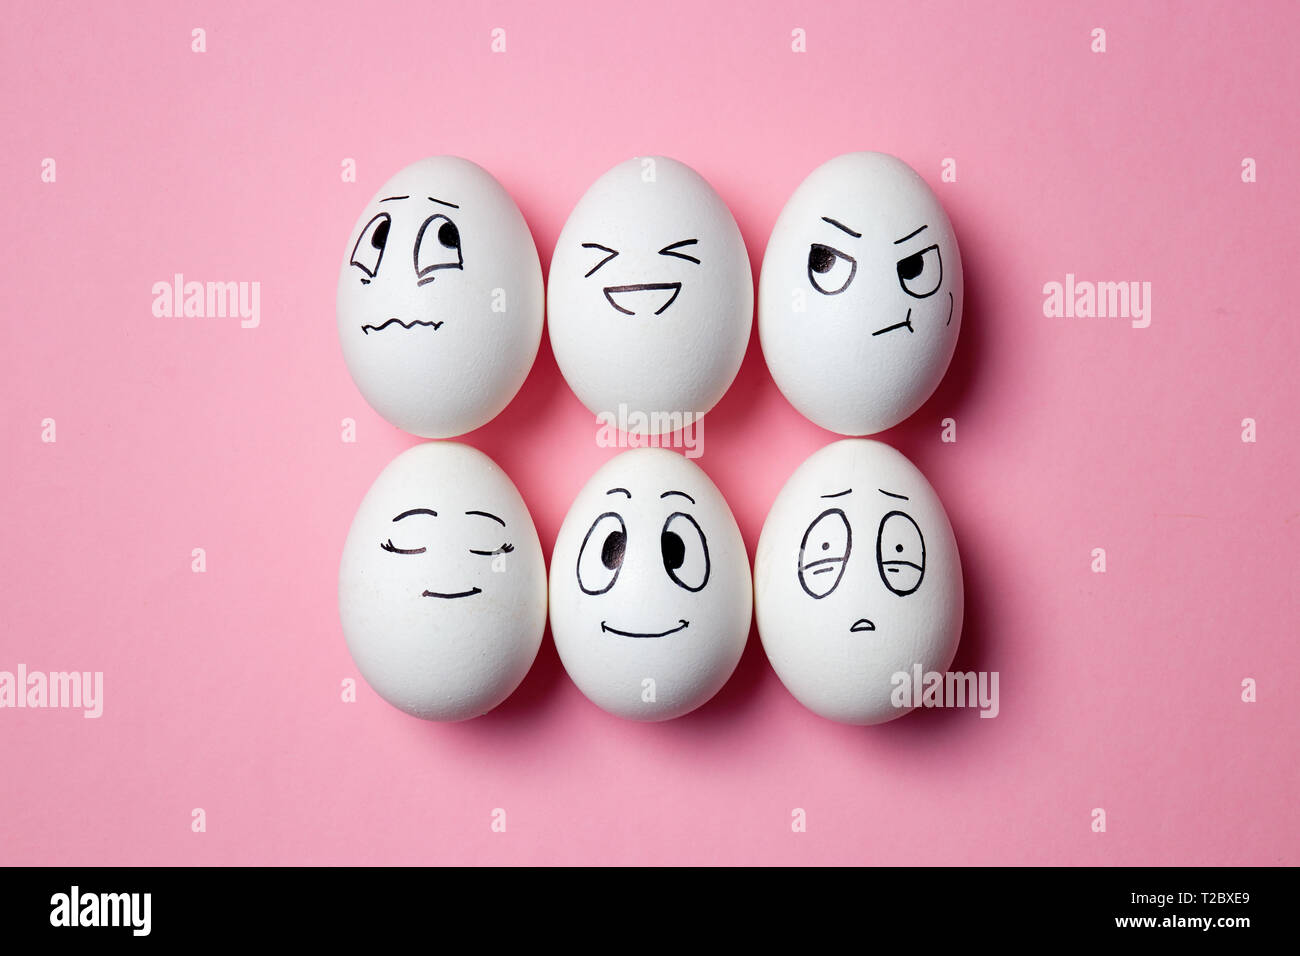 Funny Easter eggs with facial expressions. Eggs with different faces on pink background. Stock Photo